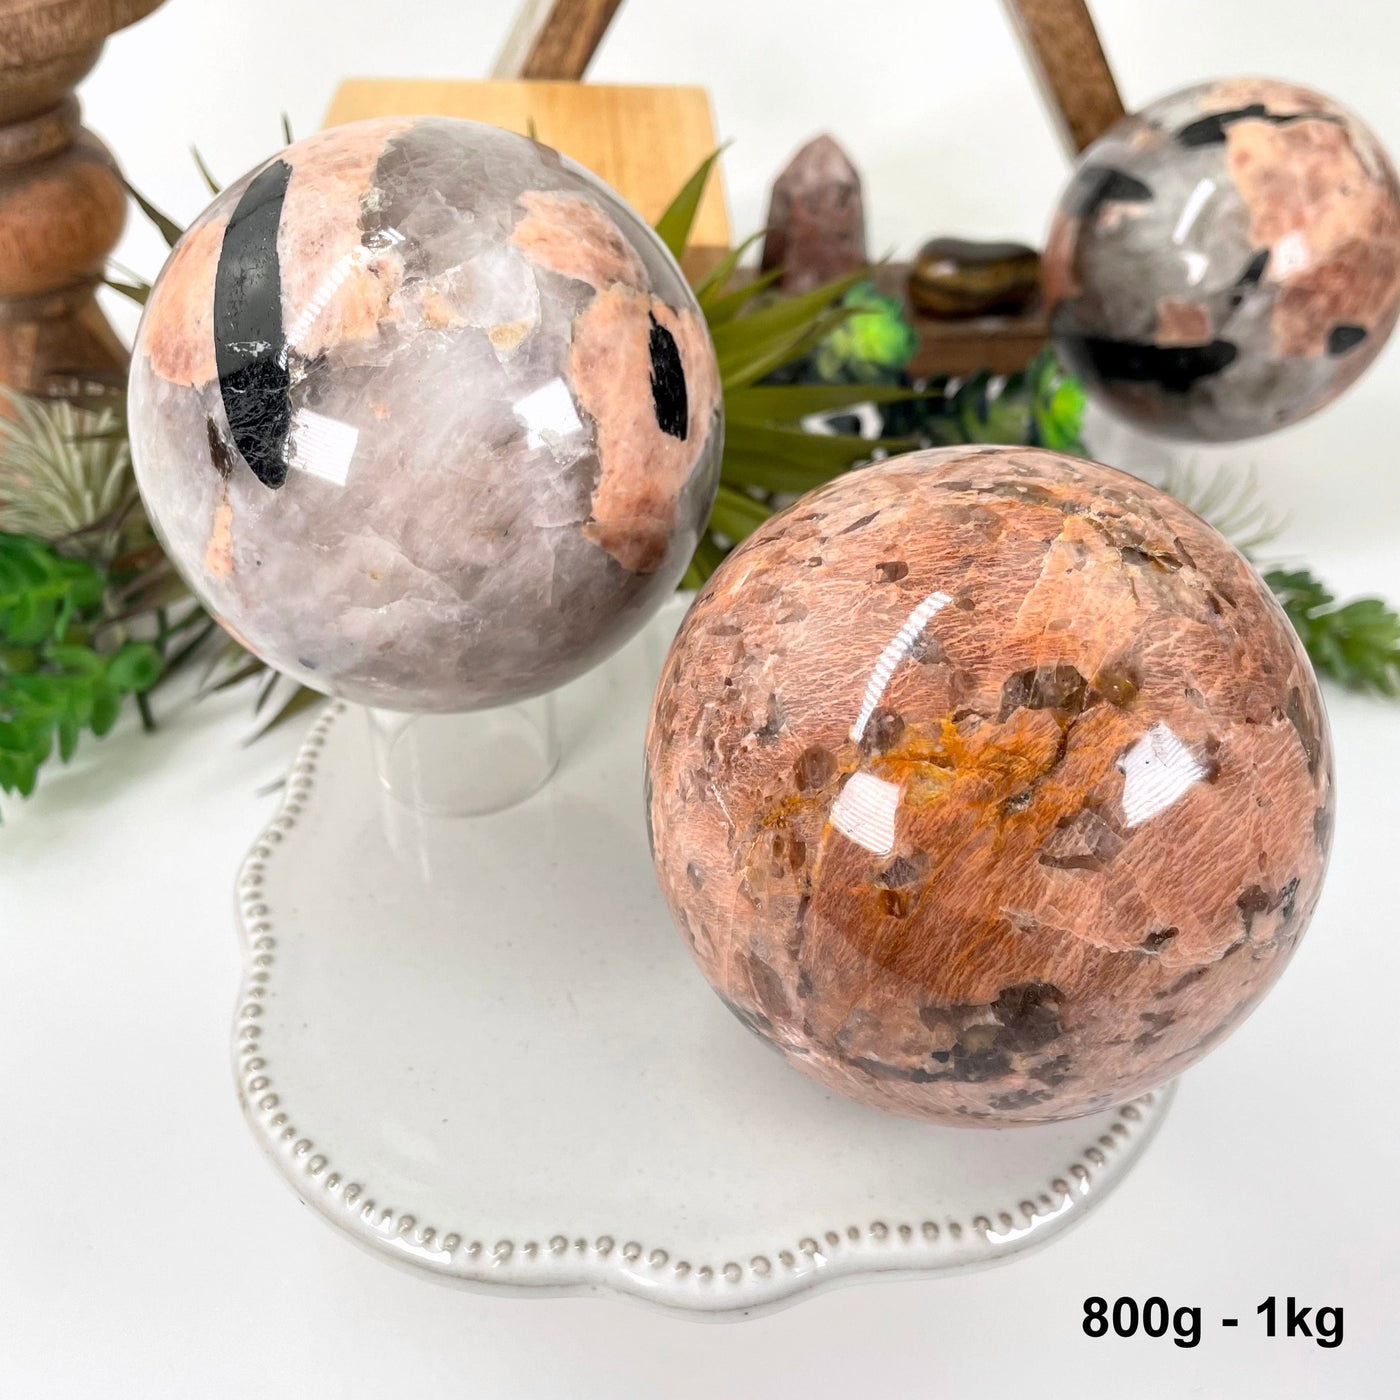 two 800g - 1kg spheres on display for possible variations